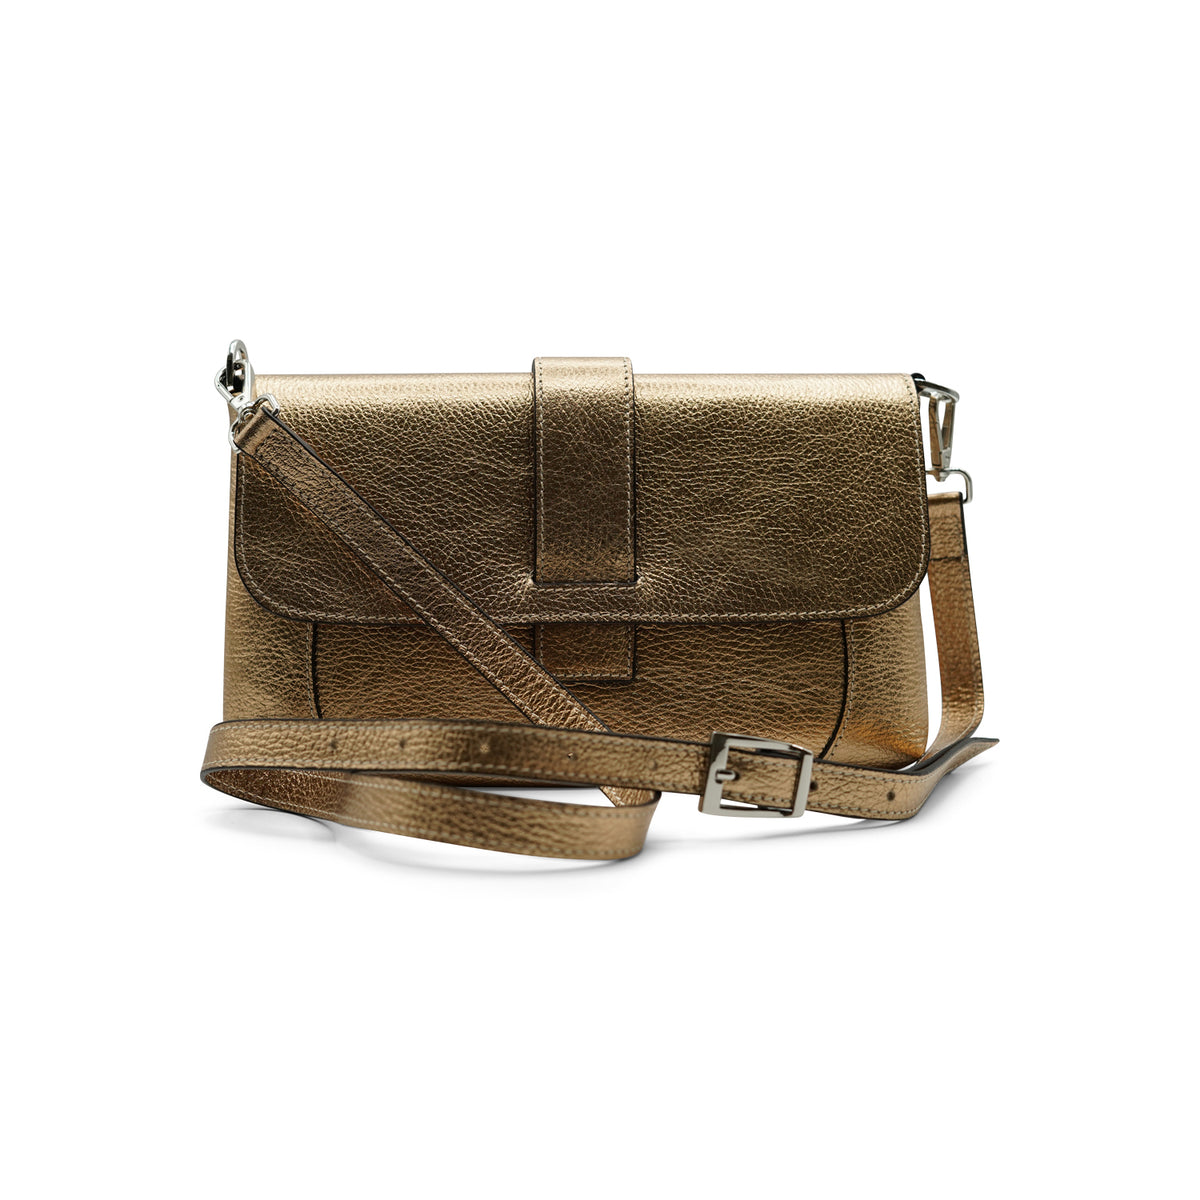 Fits Everything Clutch / Crossbody - Antique Silver